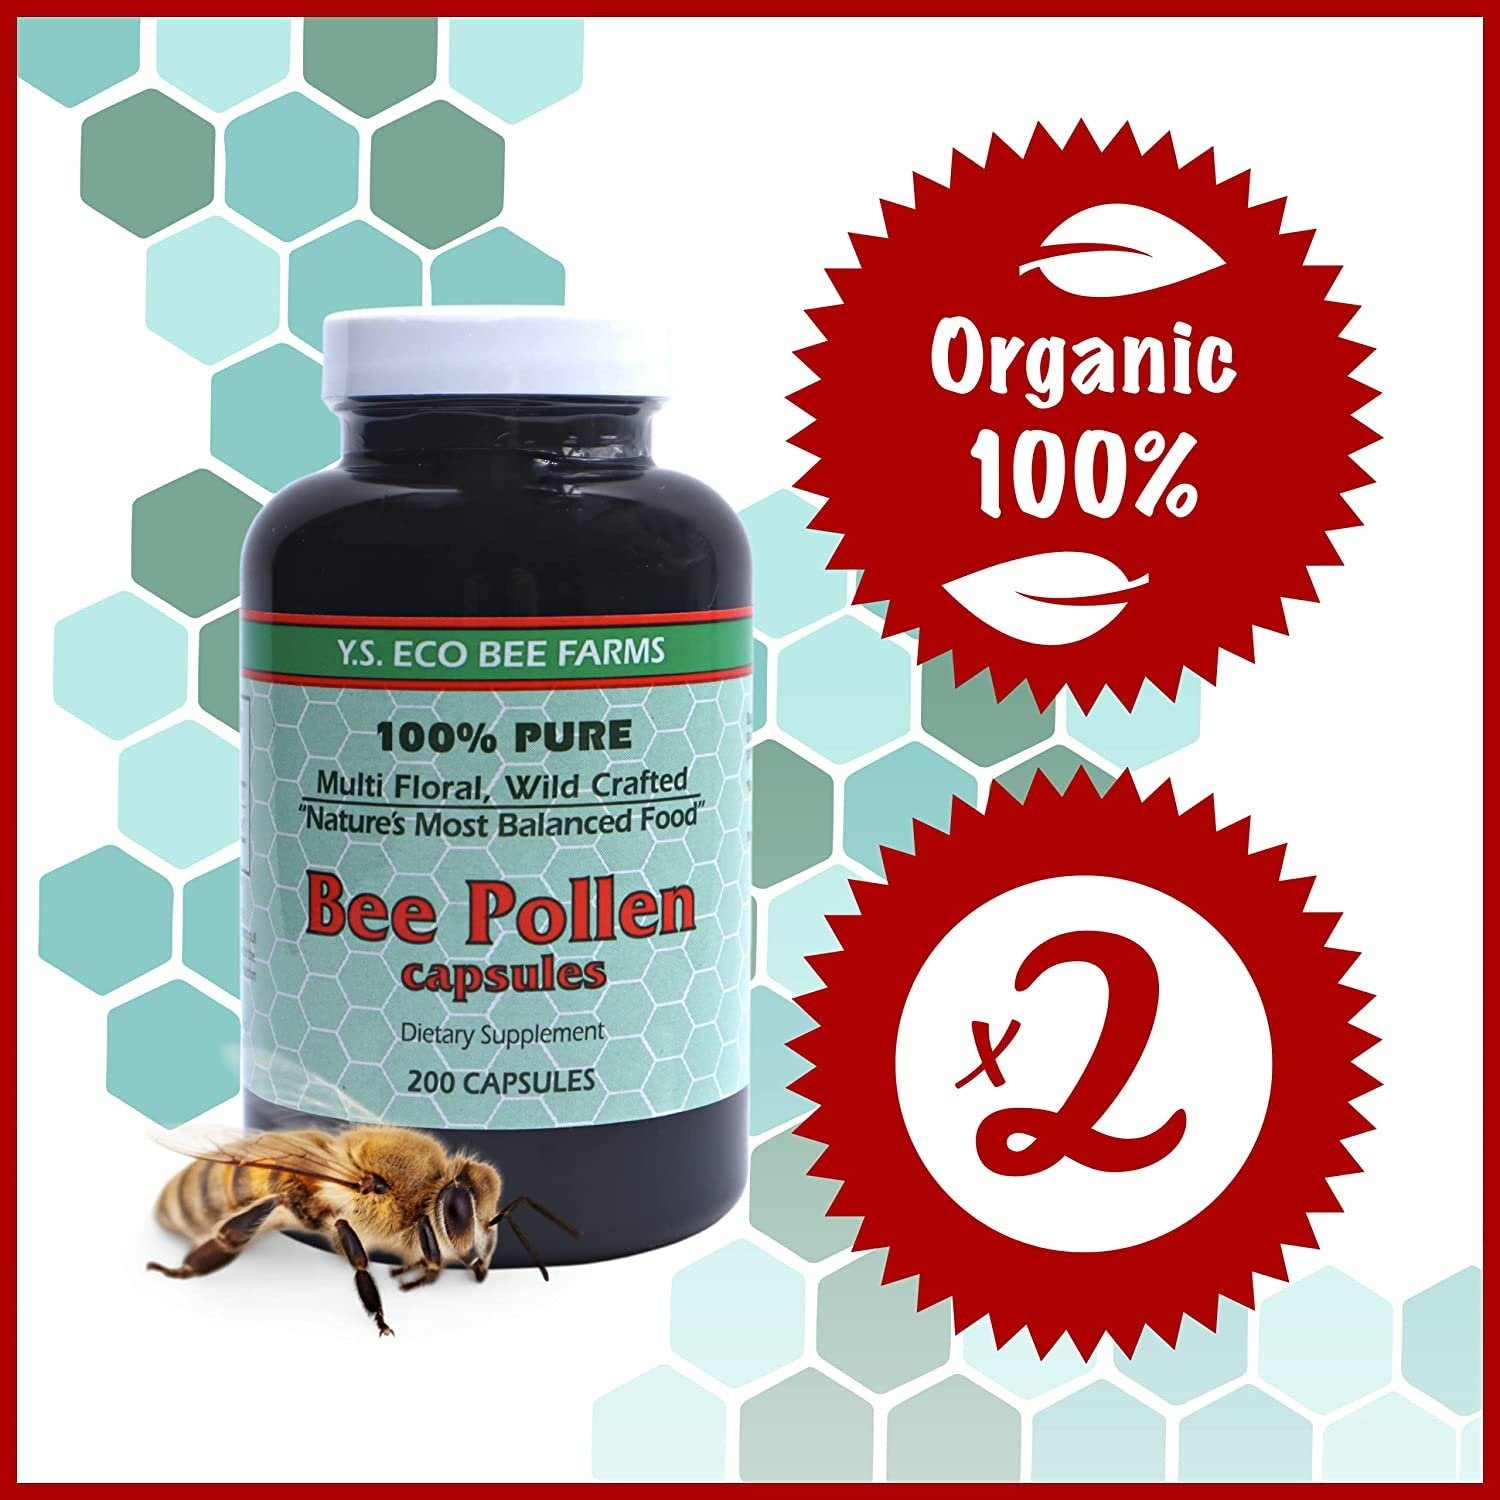 Y.S. Eco Bee Farms 100% Pure Multi Floral, Wild Crafted Bee Pollen Capsules - 2 Pack of 200 Count Bottles - Organic Bee Pollen Vitamin Supplements for Optimal Health and Wellness